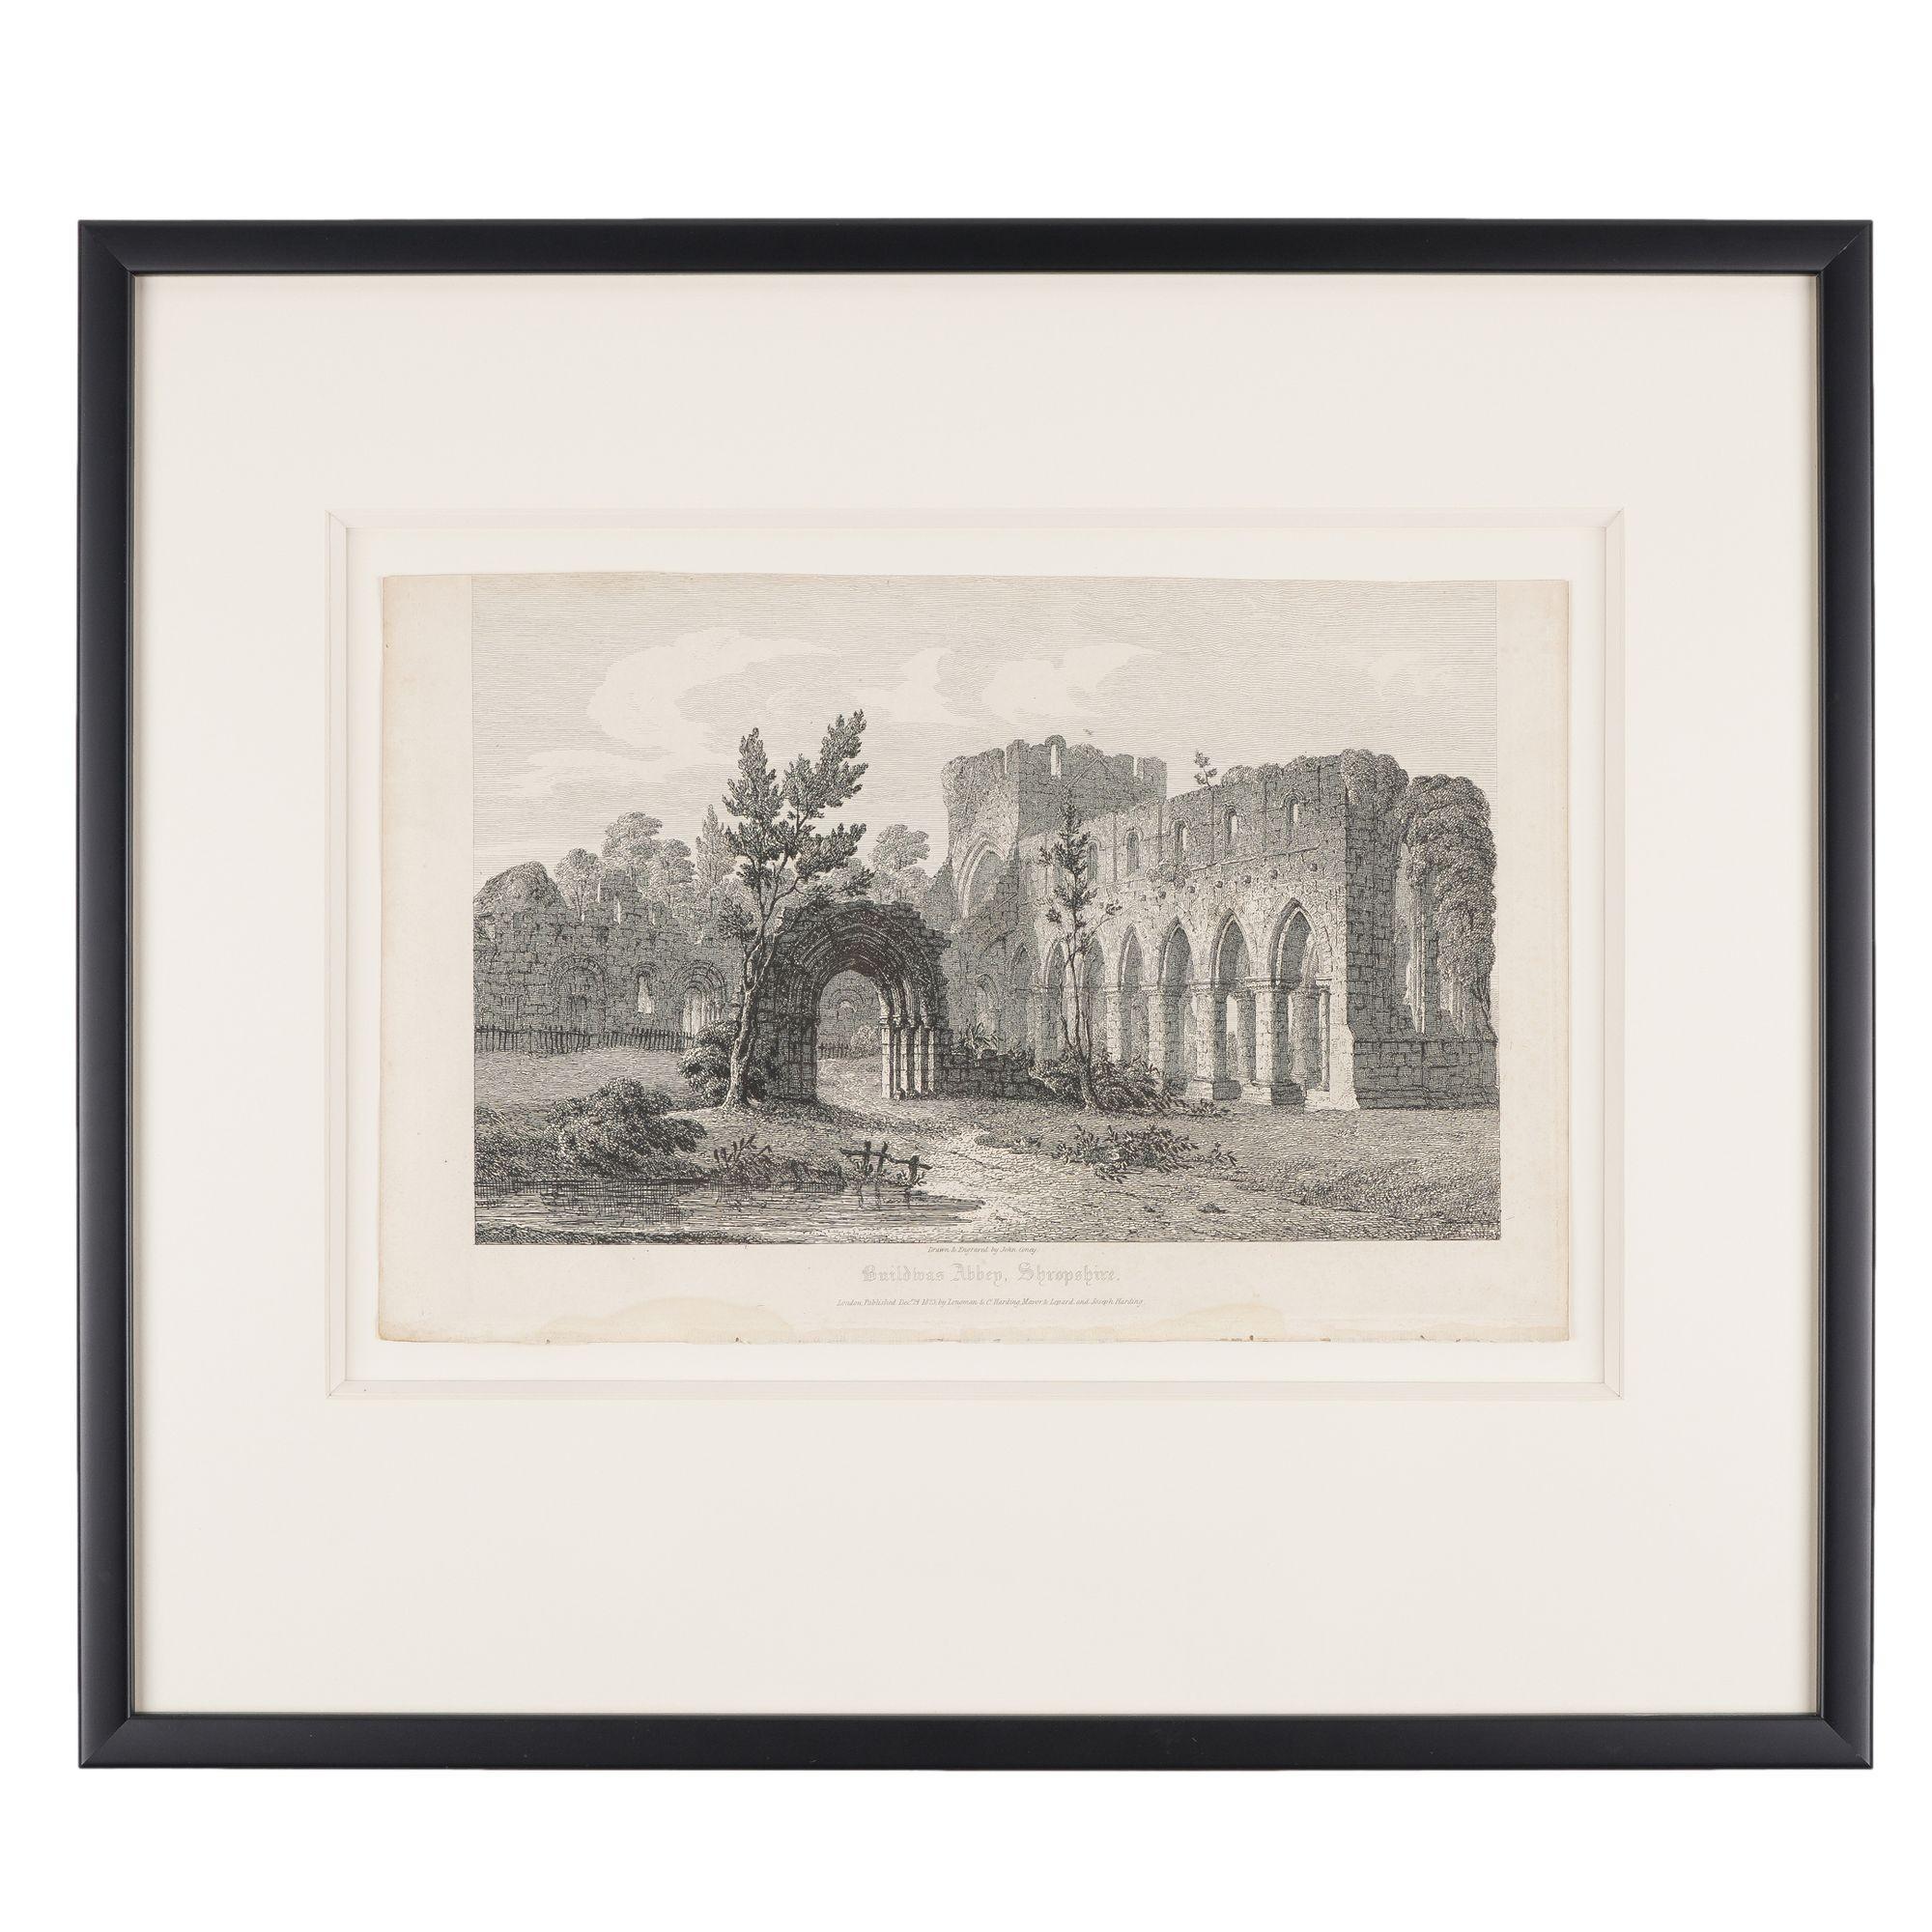 Set of four framed copperplate engravings of English Gothic ecclesiastical buildings. Engraved and printed by John Coney, signed in the plates, and published in London, 1819. Titles of the works as follows:

-Whitby Abbey, Yorkshire, 1815, North